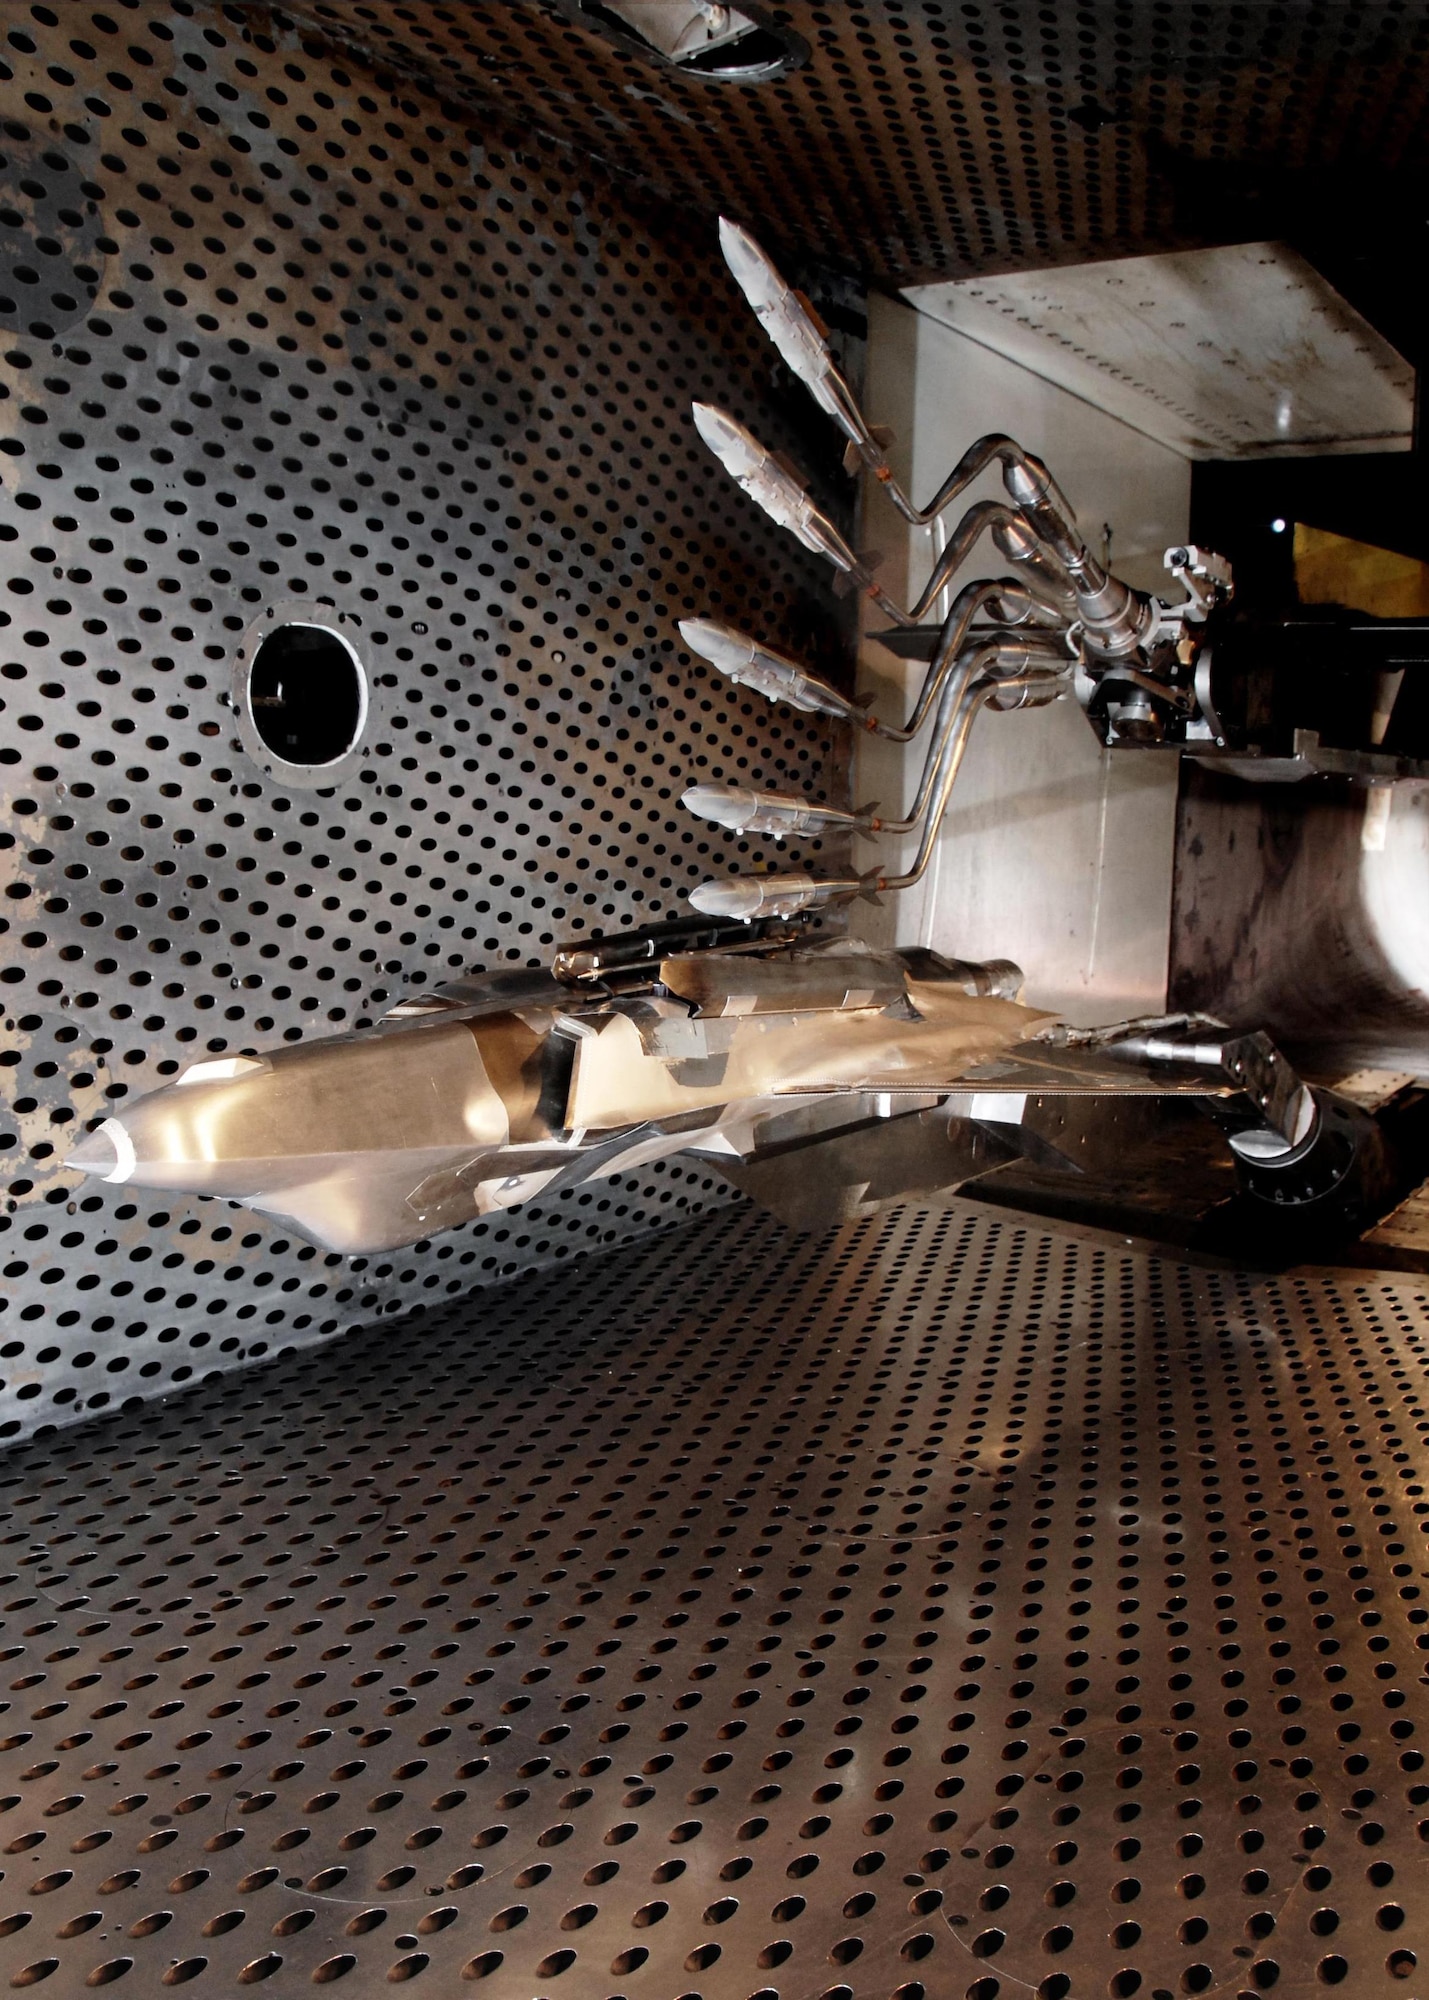 Initial weapon integration testing for the F-35 was conducted at the Arnold Engineering Development Complex. Pictured here are multiple exposures of a Guided Bomb Unit-31 Joint Direct Attack Munition, separating from the F-35 Lightning II aircraft in the 4-foot transonic wind tunnel during testing at AEDC in 2007. (Courtesy photo/Rick Goodfriend)